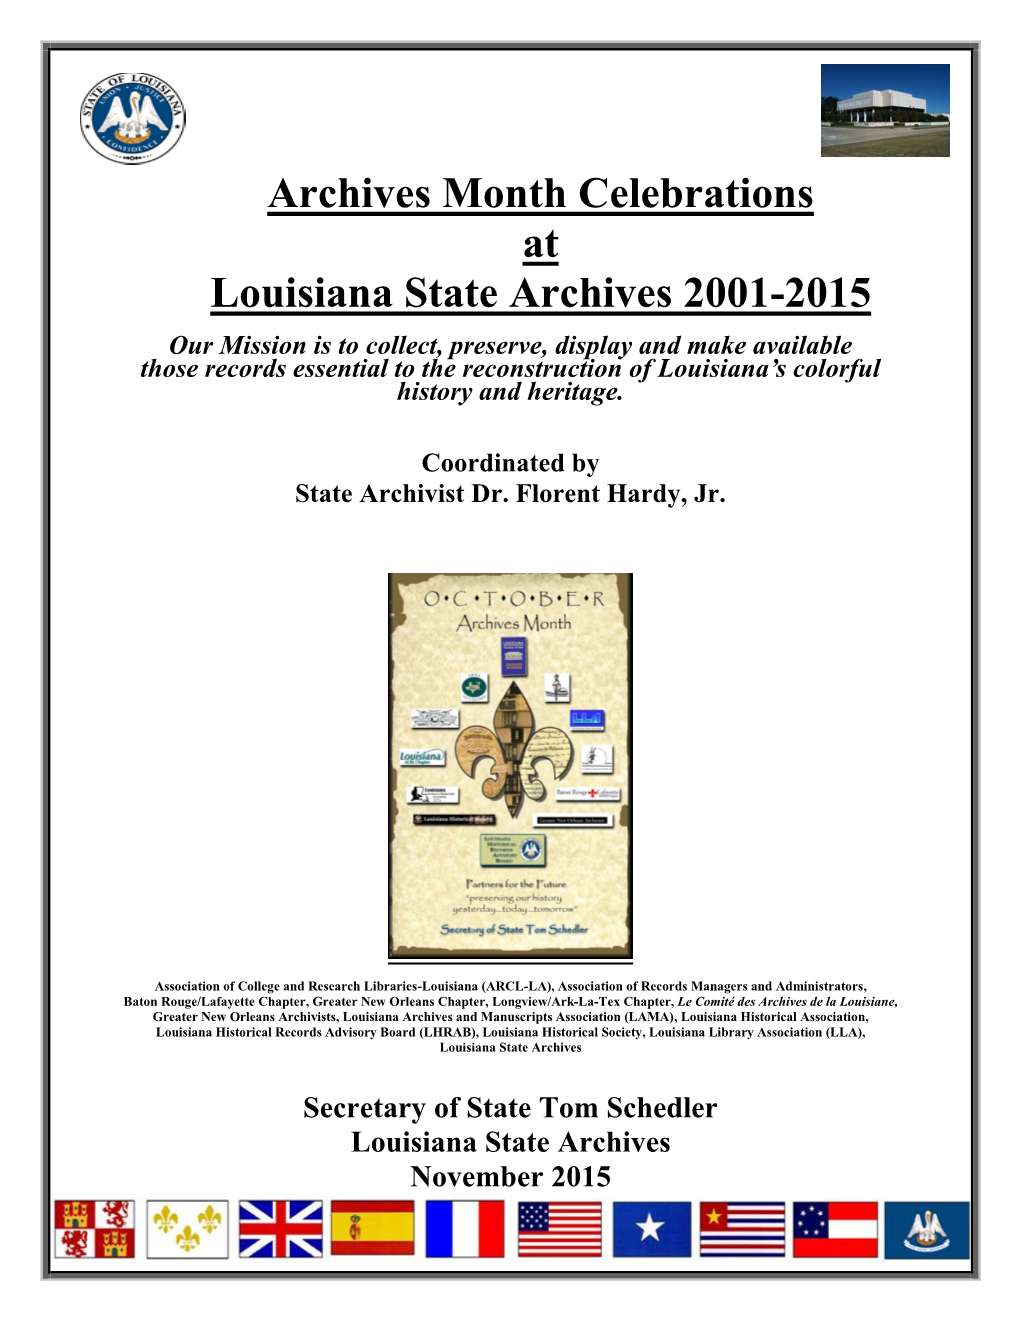 Archives Month Celebrations at Louisiana State Archives 2001-2015